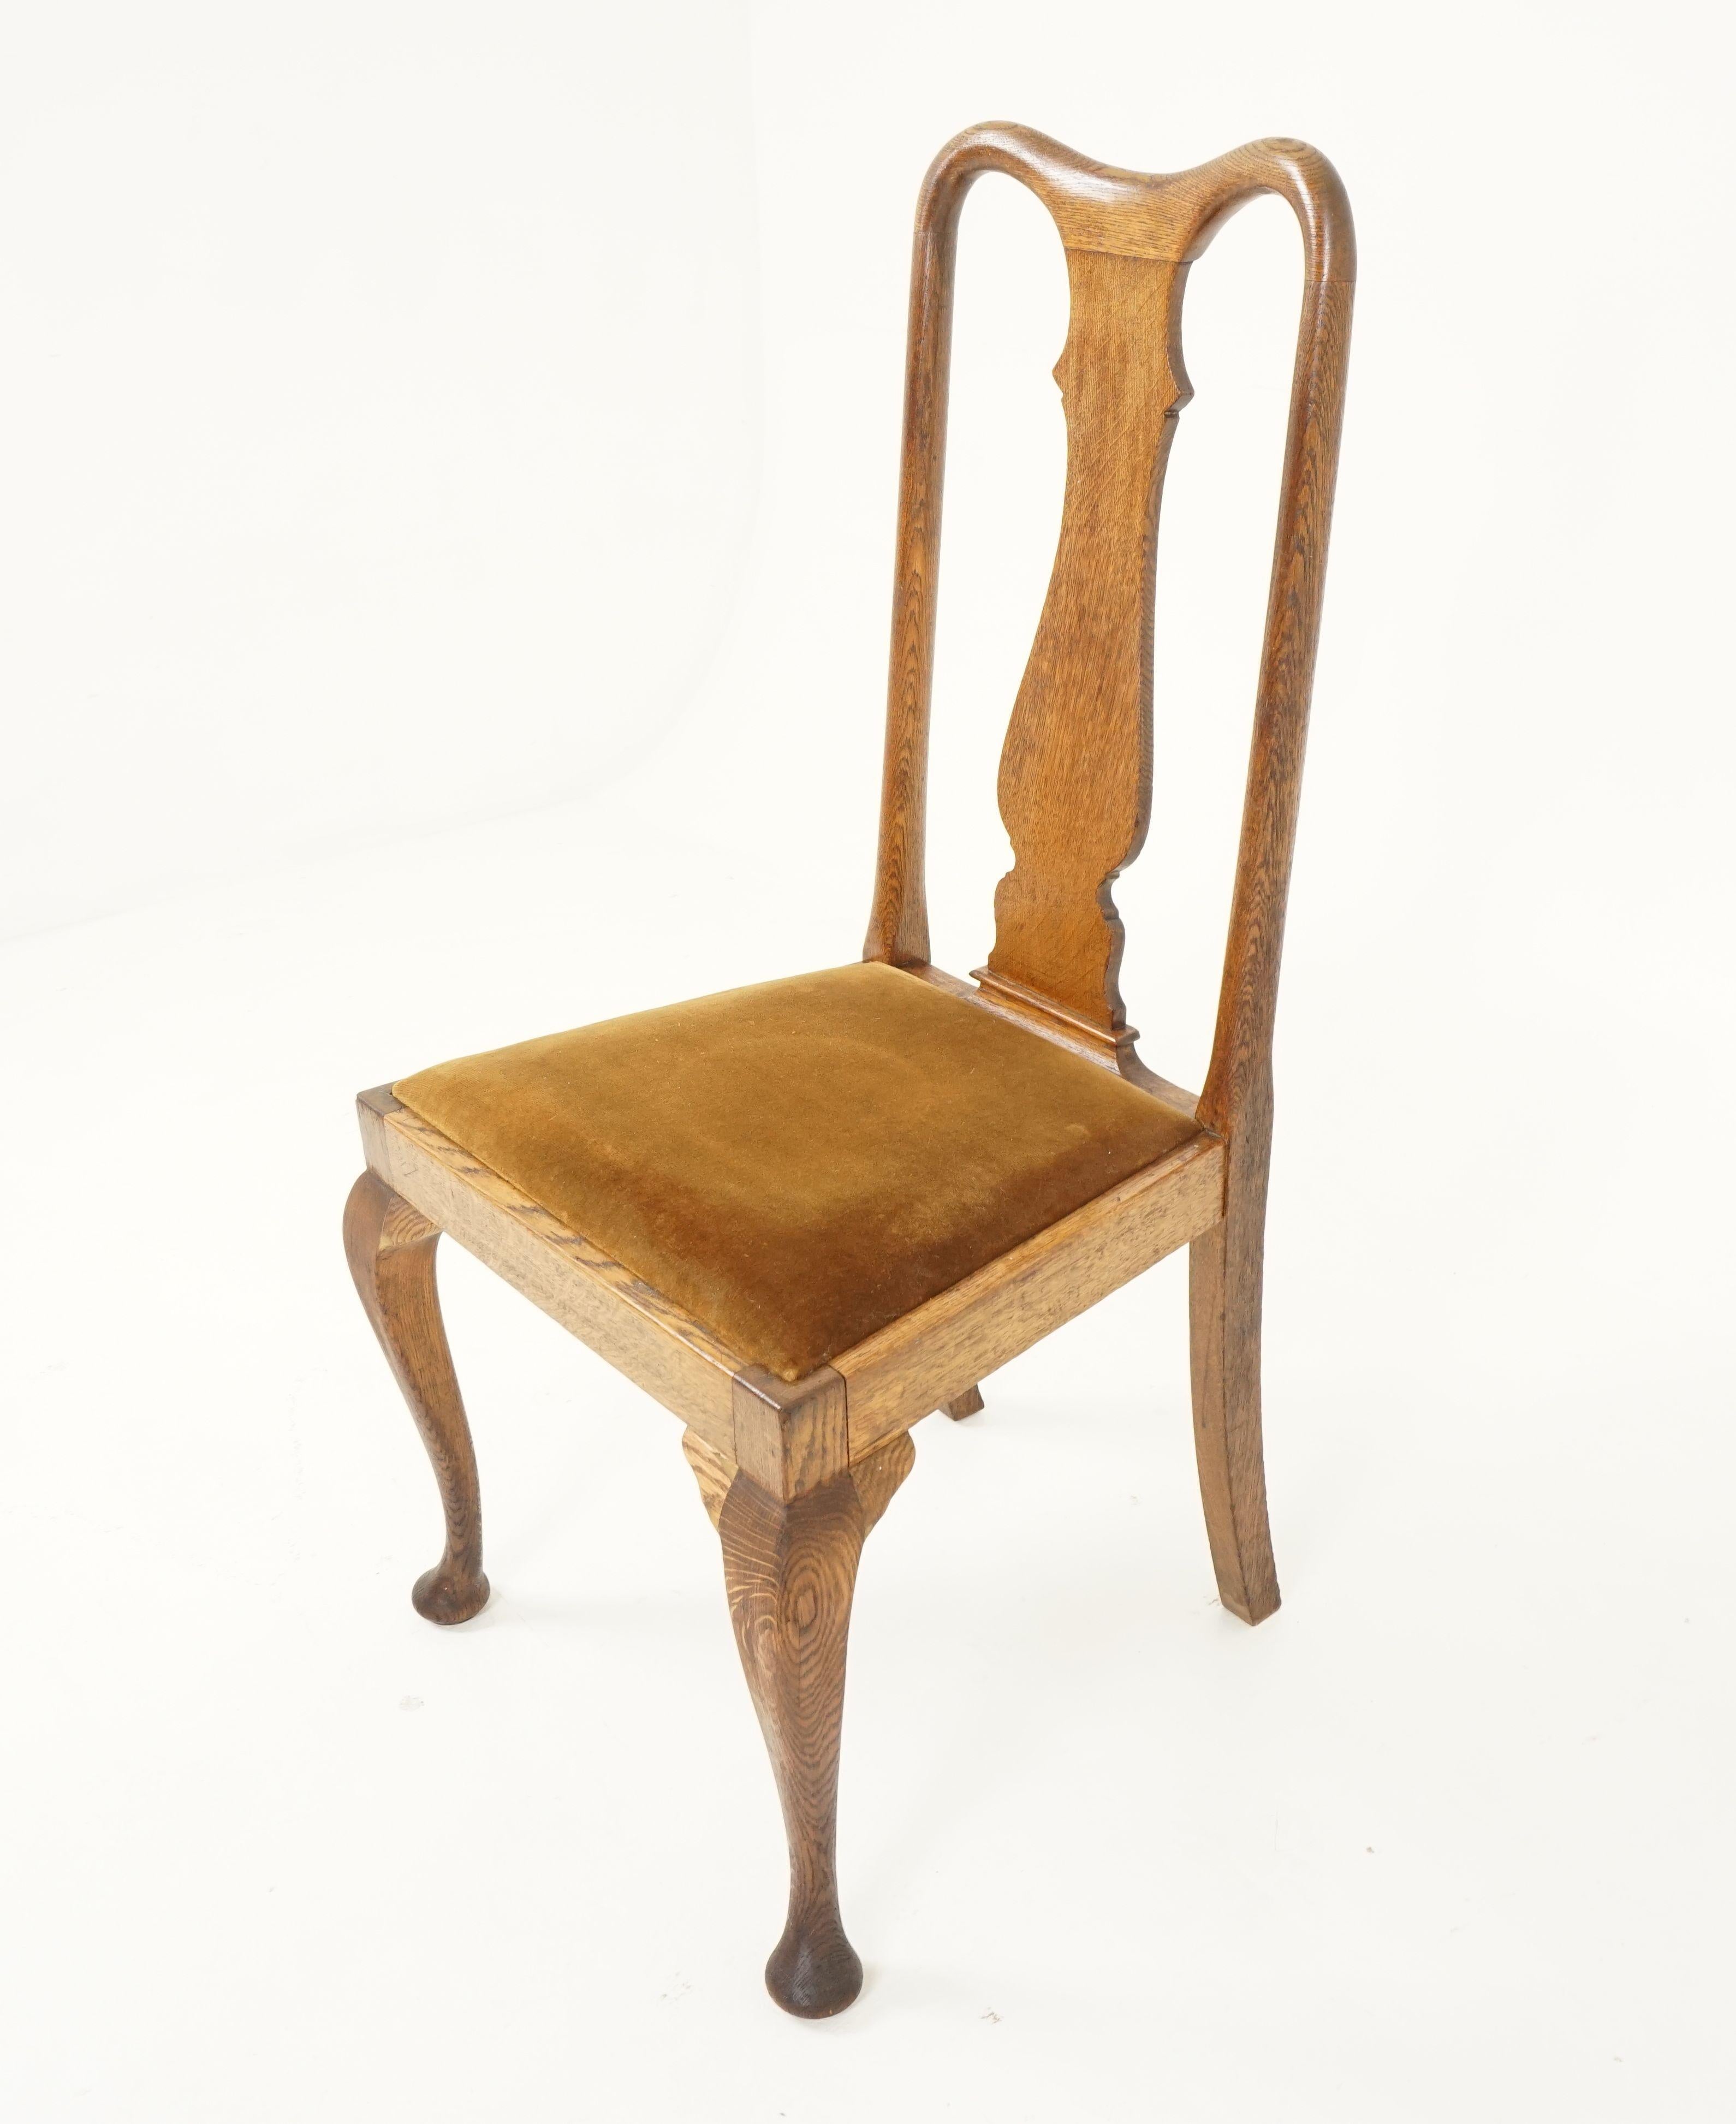 Early 20th Century Antique Set of Chairs, Queen Anne Style, Oak, 8 Chairs, Scotland 1910, B2327